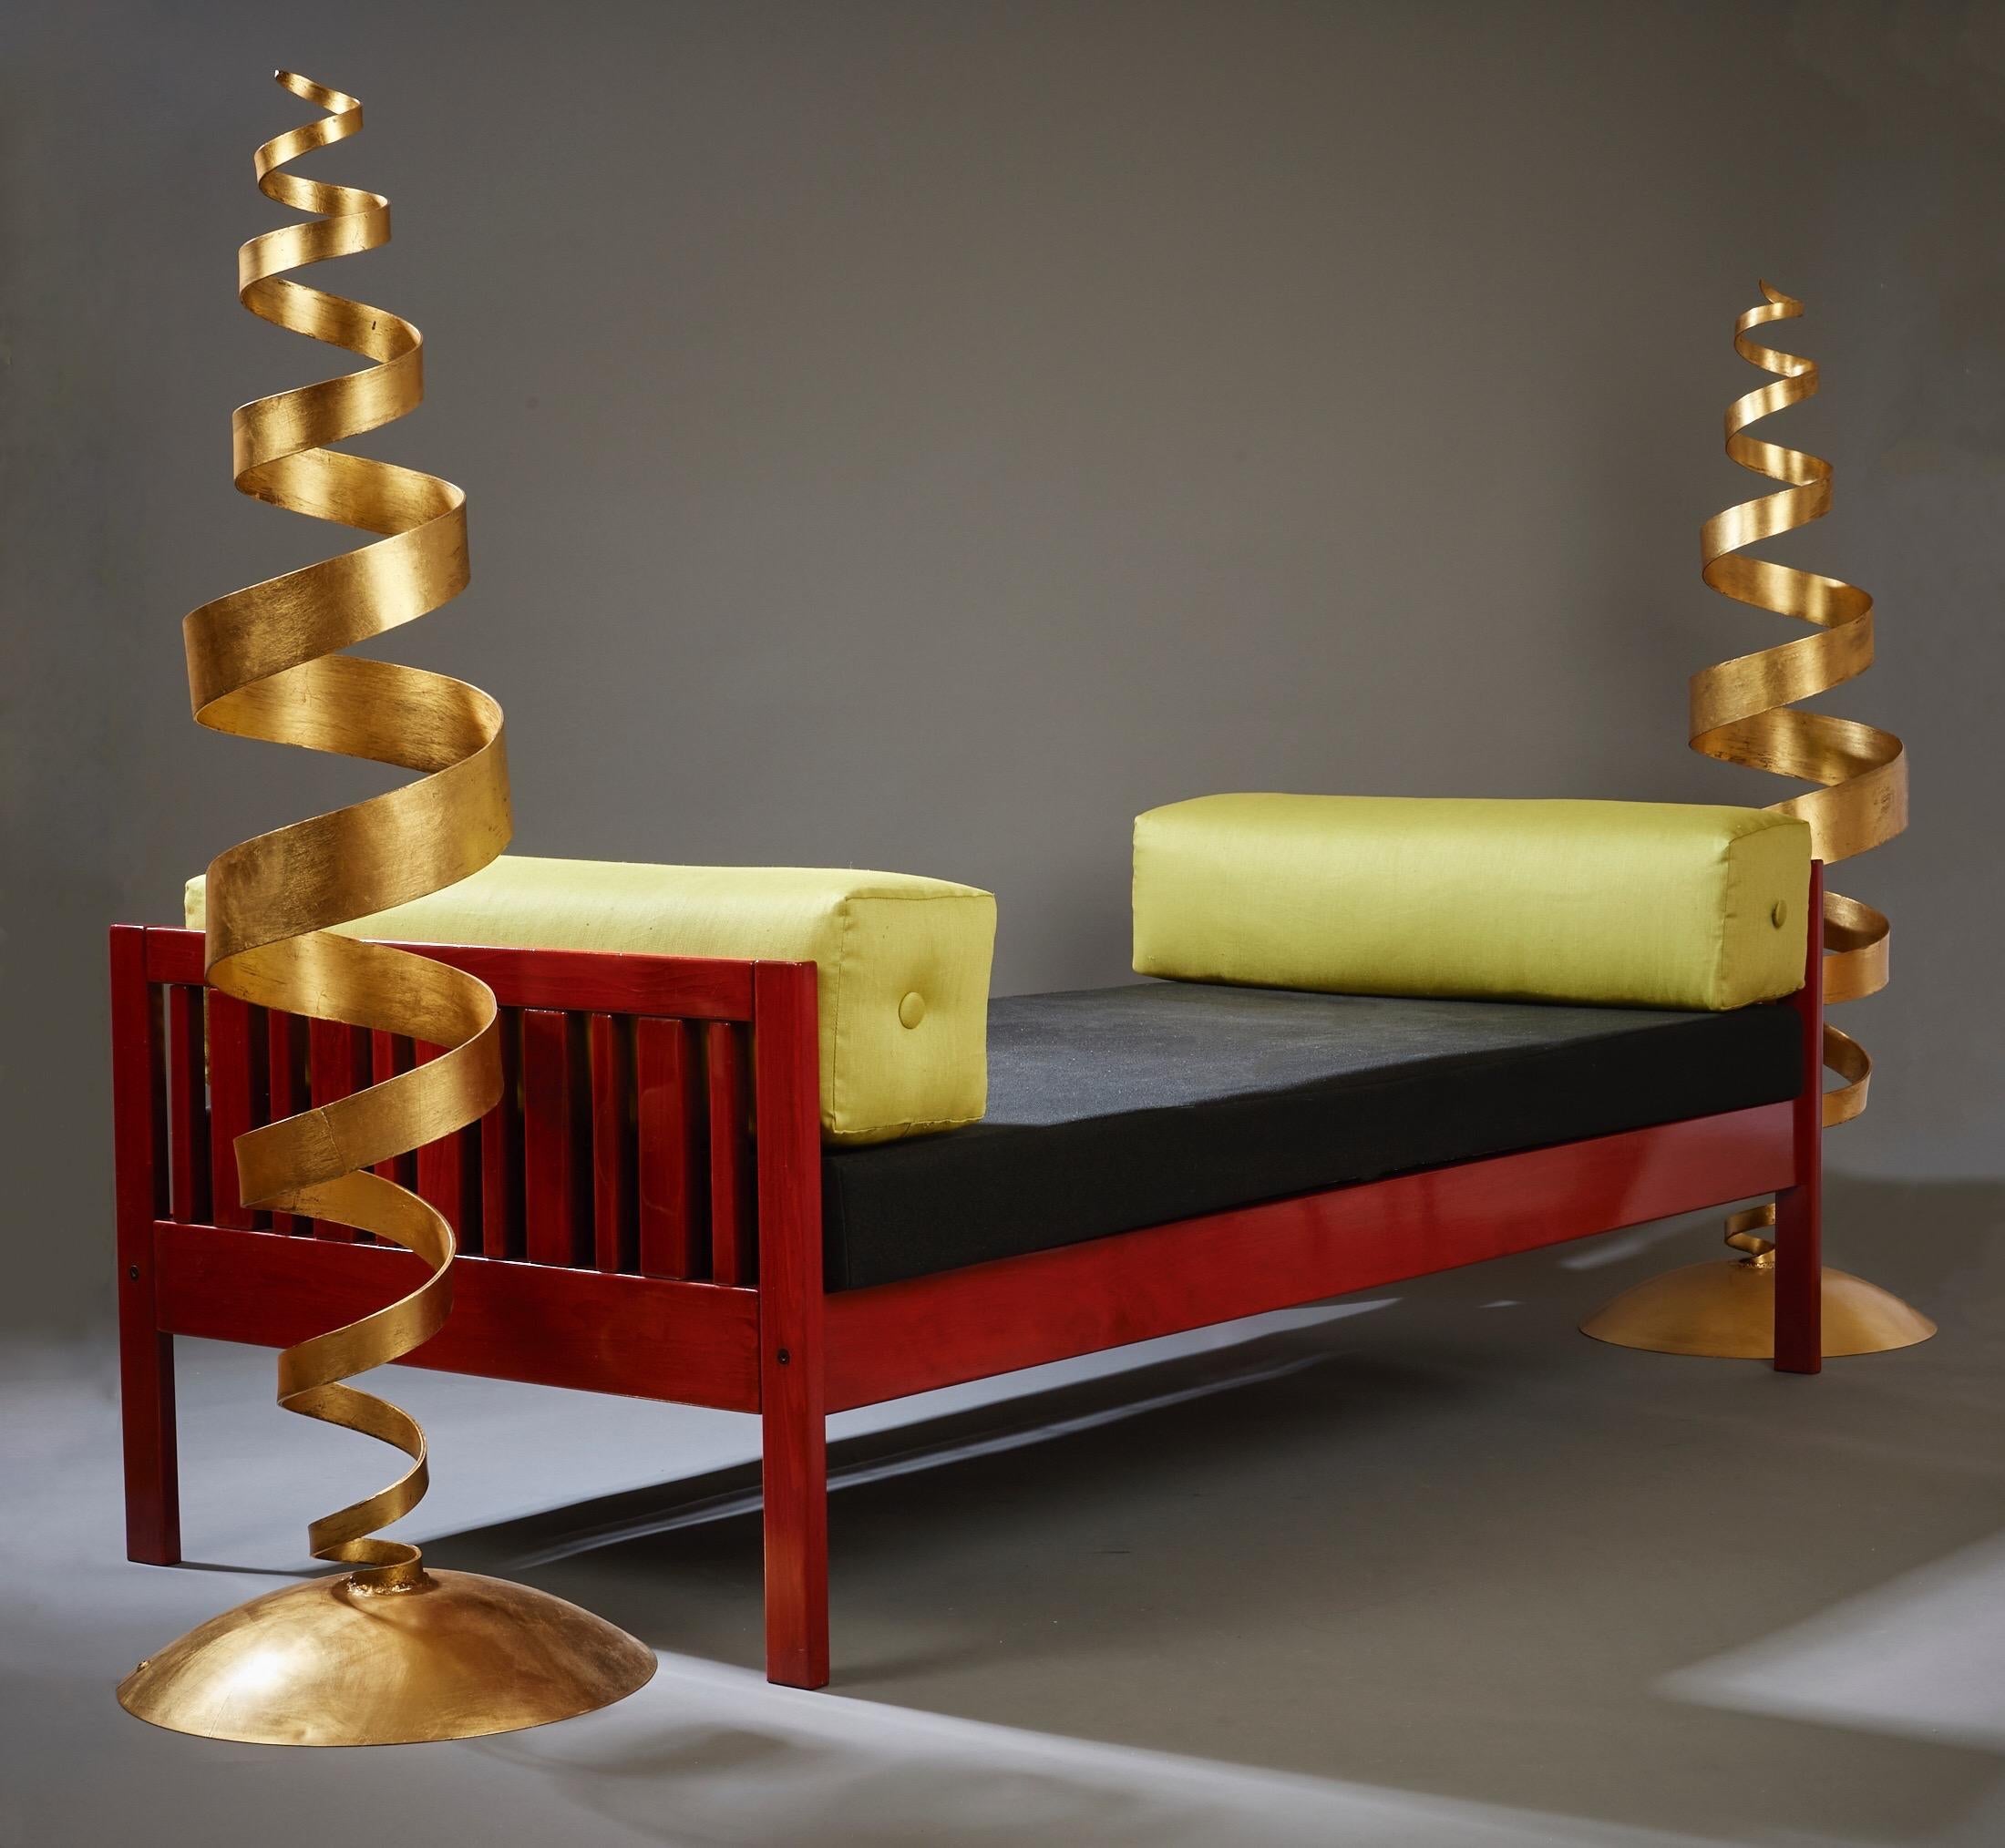 Ettore Sottsass Daybed, Red Lacquered Wood, Chartreuse Upholstery, Italy c. 1962 For Sale 8